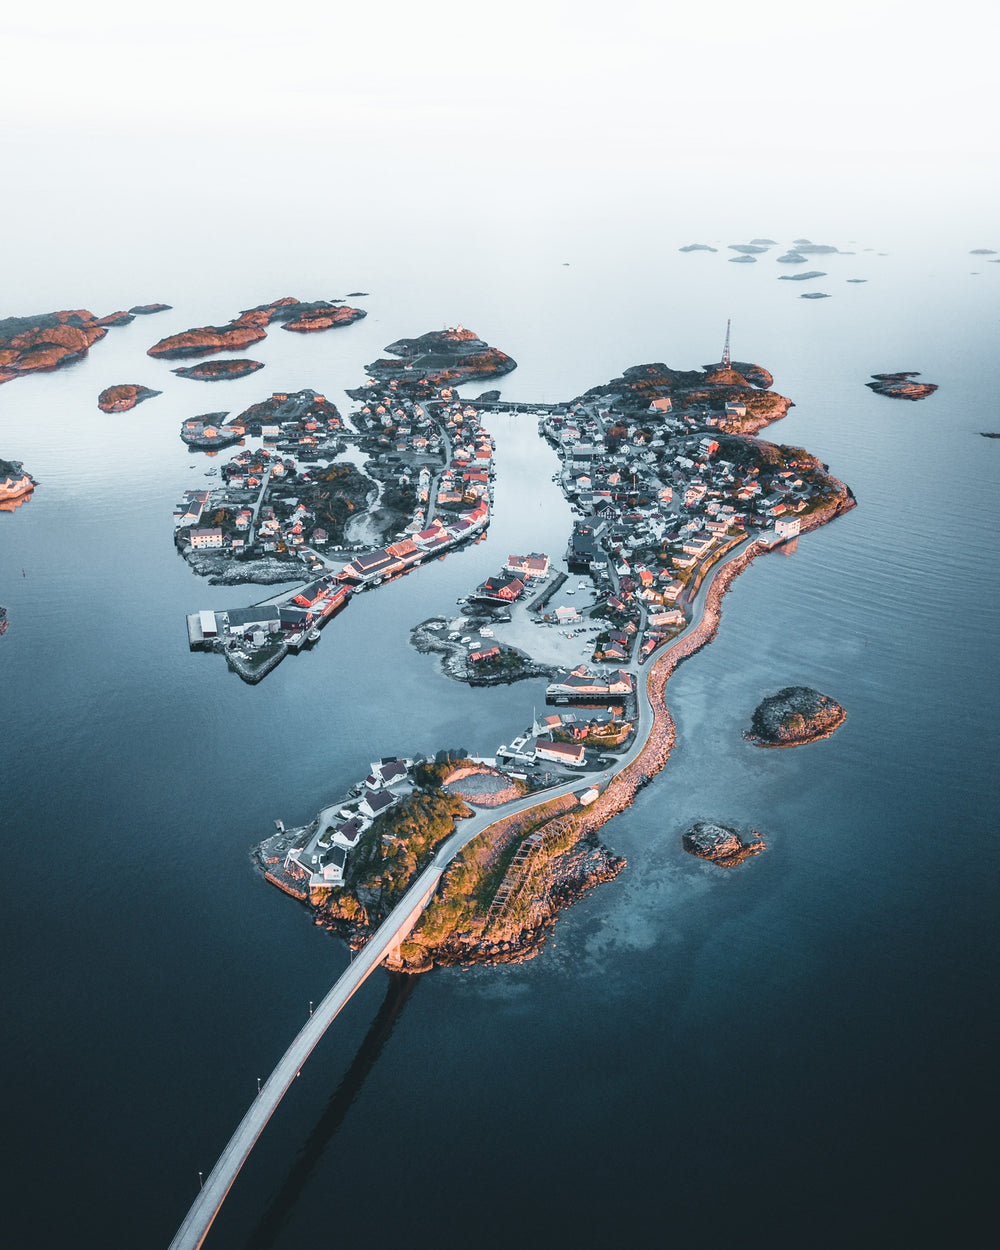 island fishing villages connected by bridges